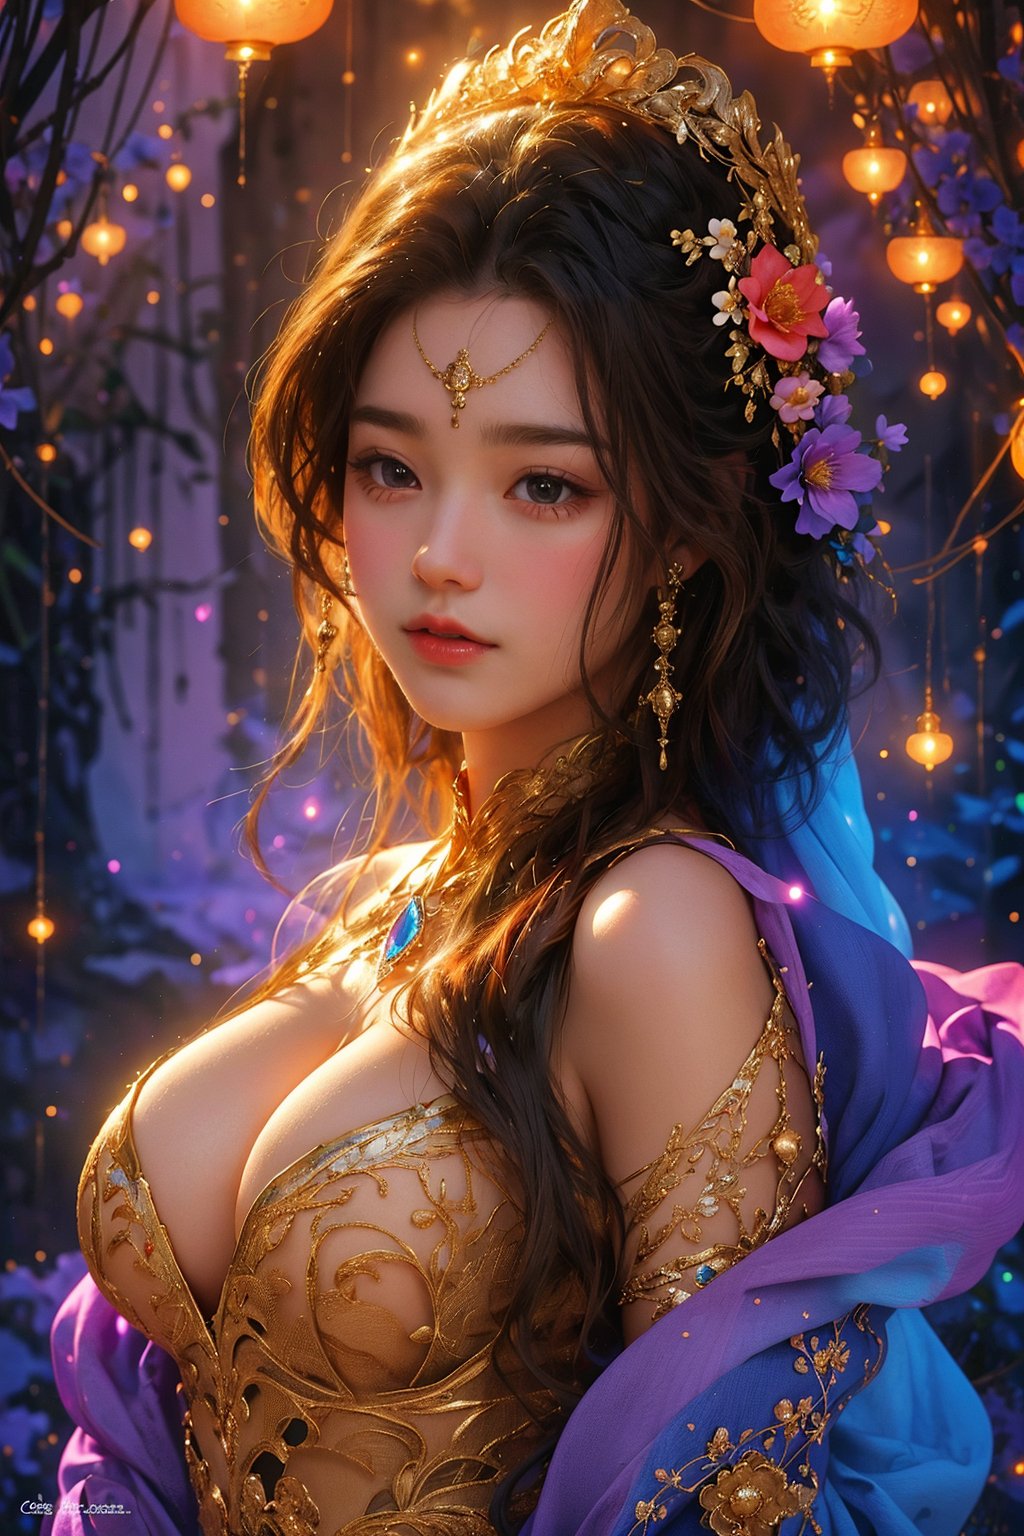  busty and sexy girl, 8k, masterpiece, ultra-realistic, best quality, high resolution, high definition, A stunning sorceress, enveloped in prisms of color, is adorned in her most exquisite attire and her finest jewels, colorful glowing flower